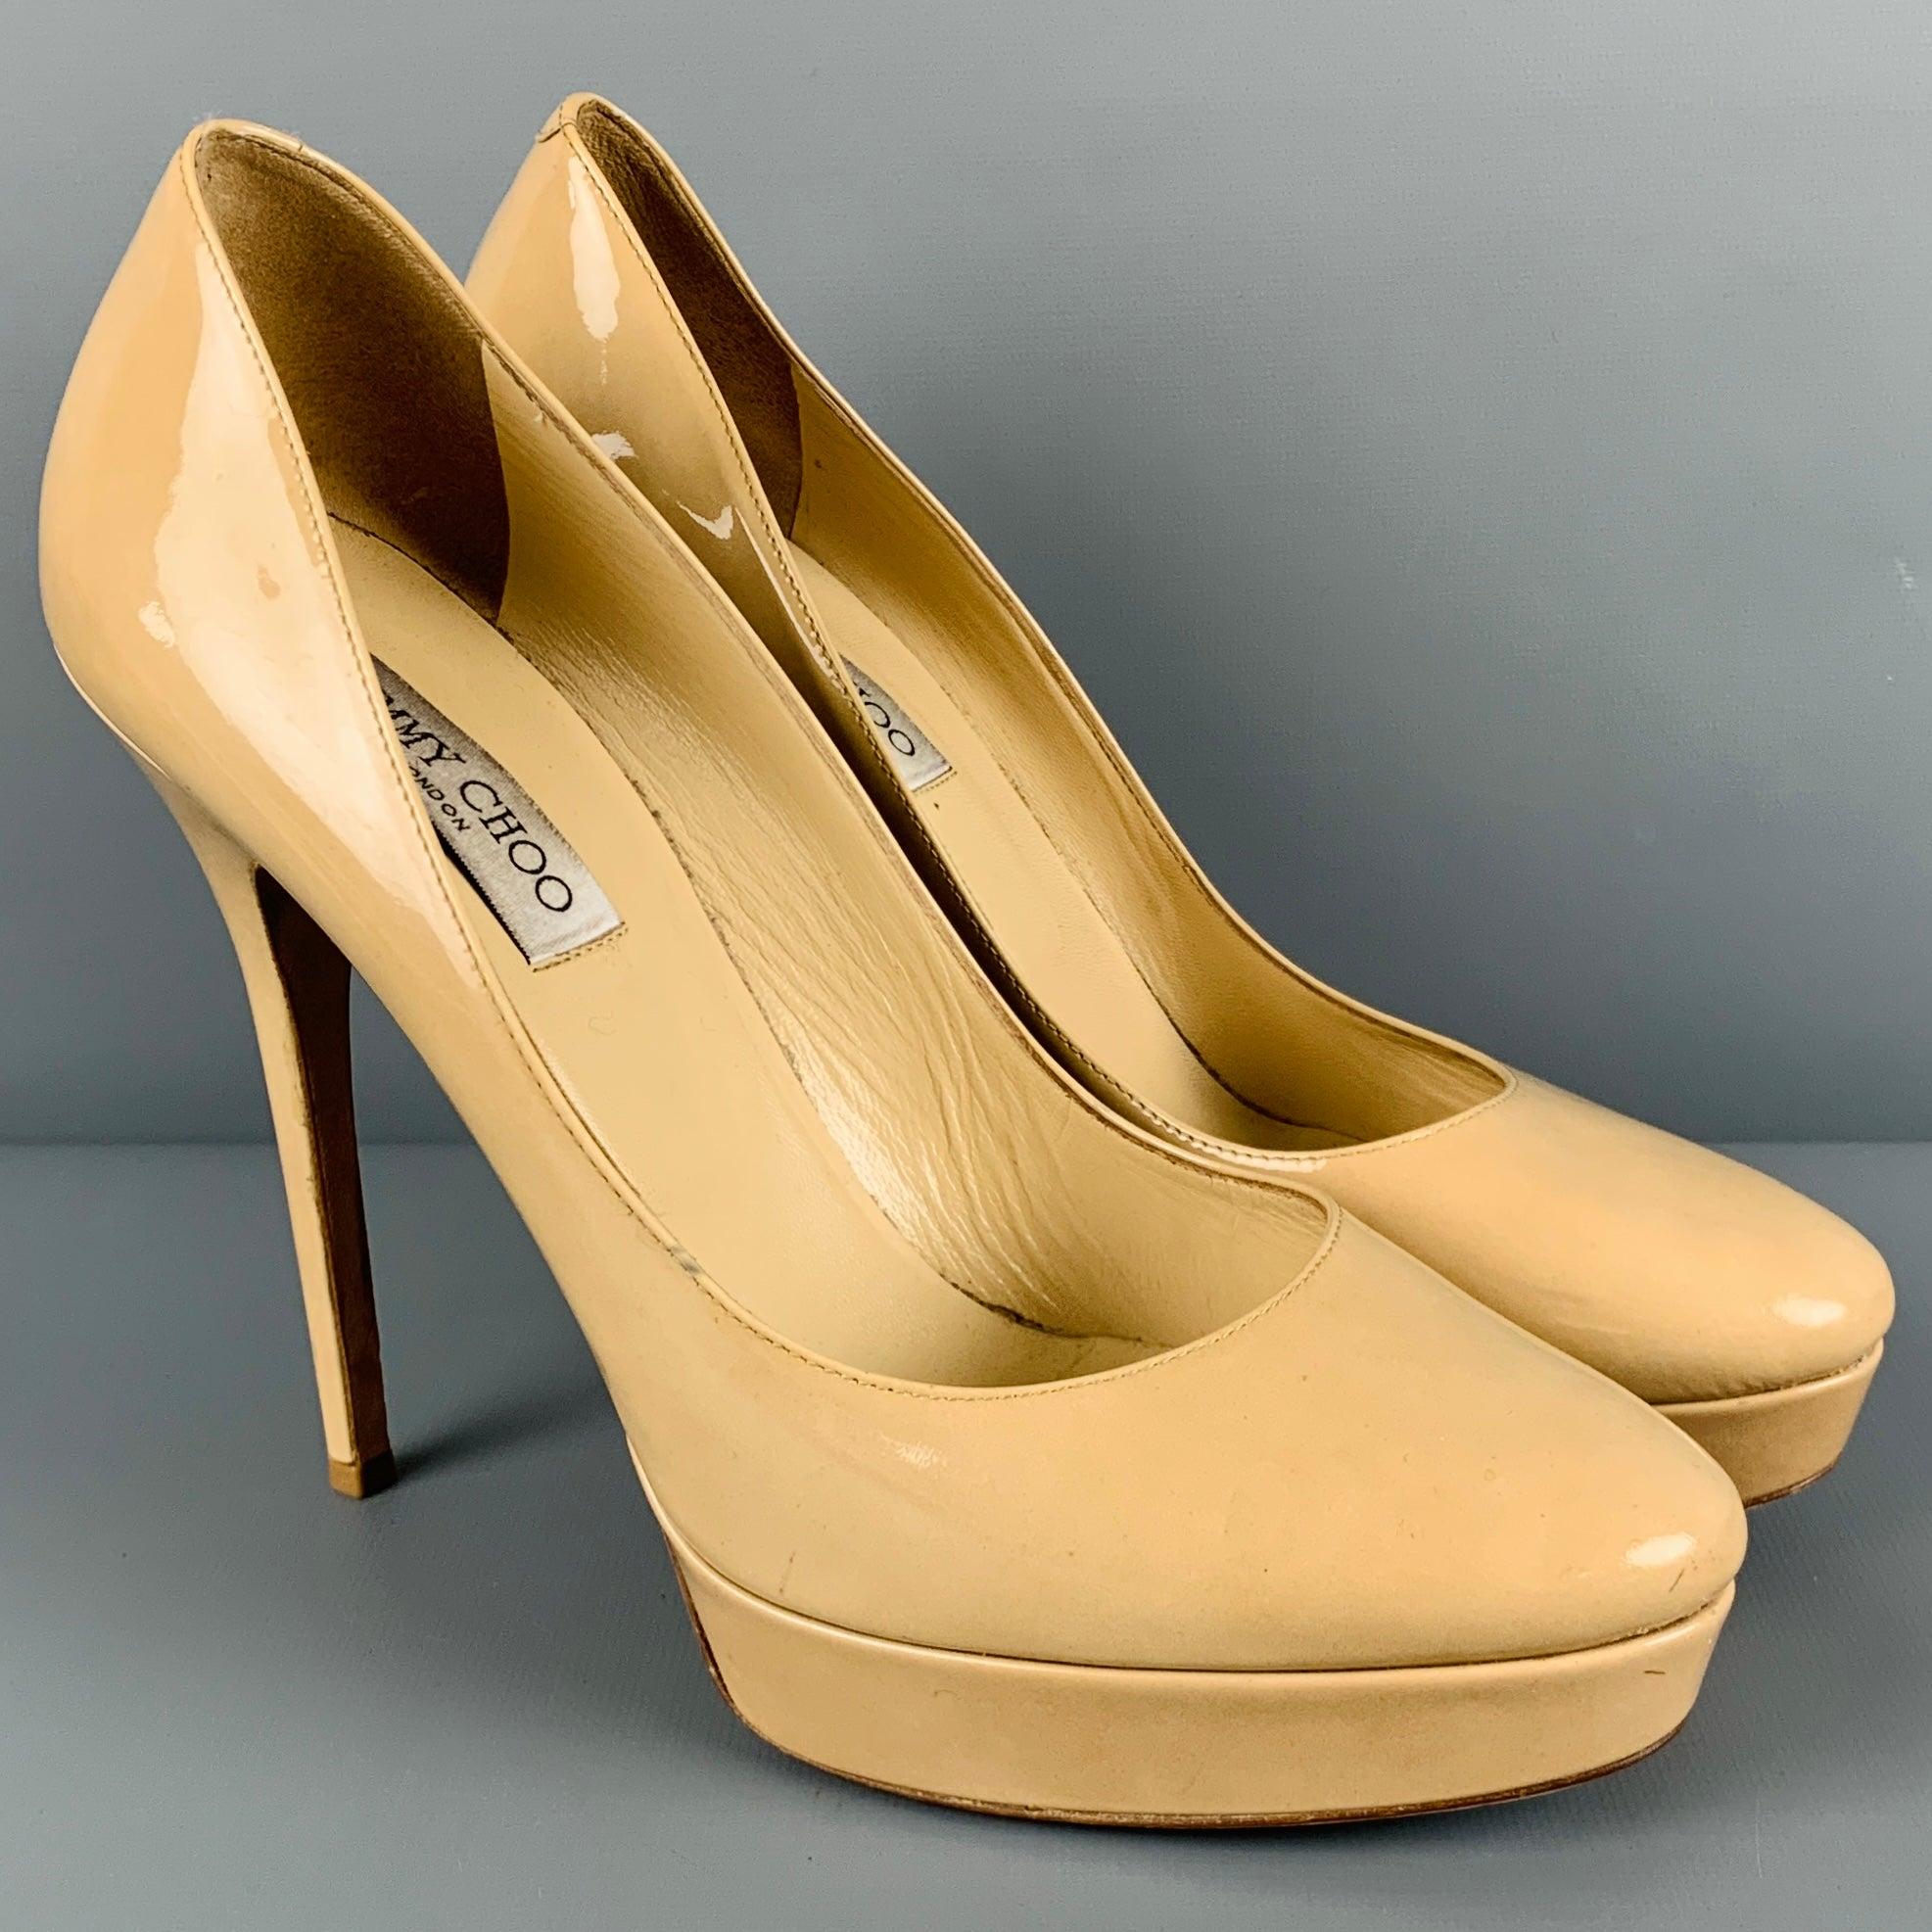 JIMMY CHOO pumps
in a beige patent leather fabric featuring a platform style, and slip on closure. Made in Italy.Good Pre-Owned Condition. Moderate marks, as is. Please check photos. 

Marked:   42 

Measurements: 
  Platform: 0.75 inches Heel: 5.25